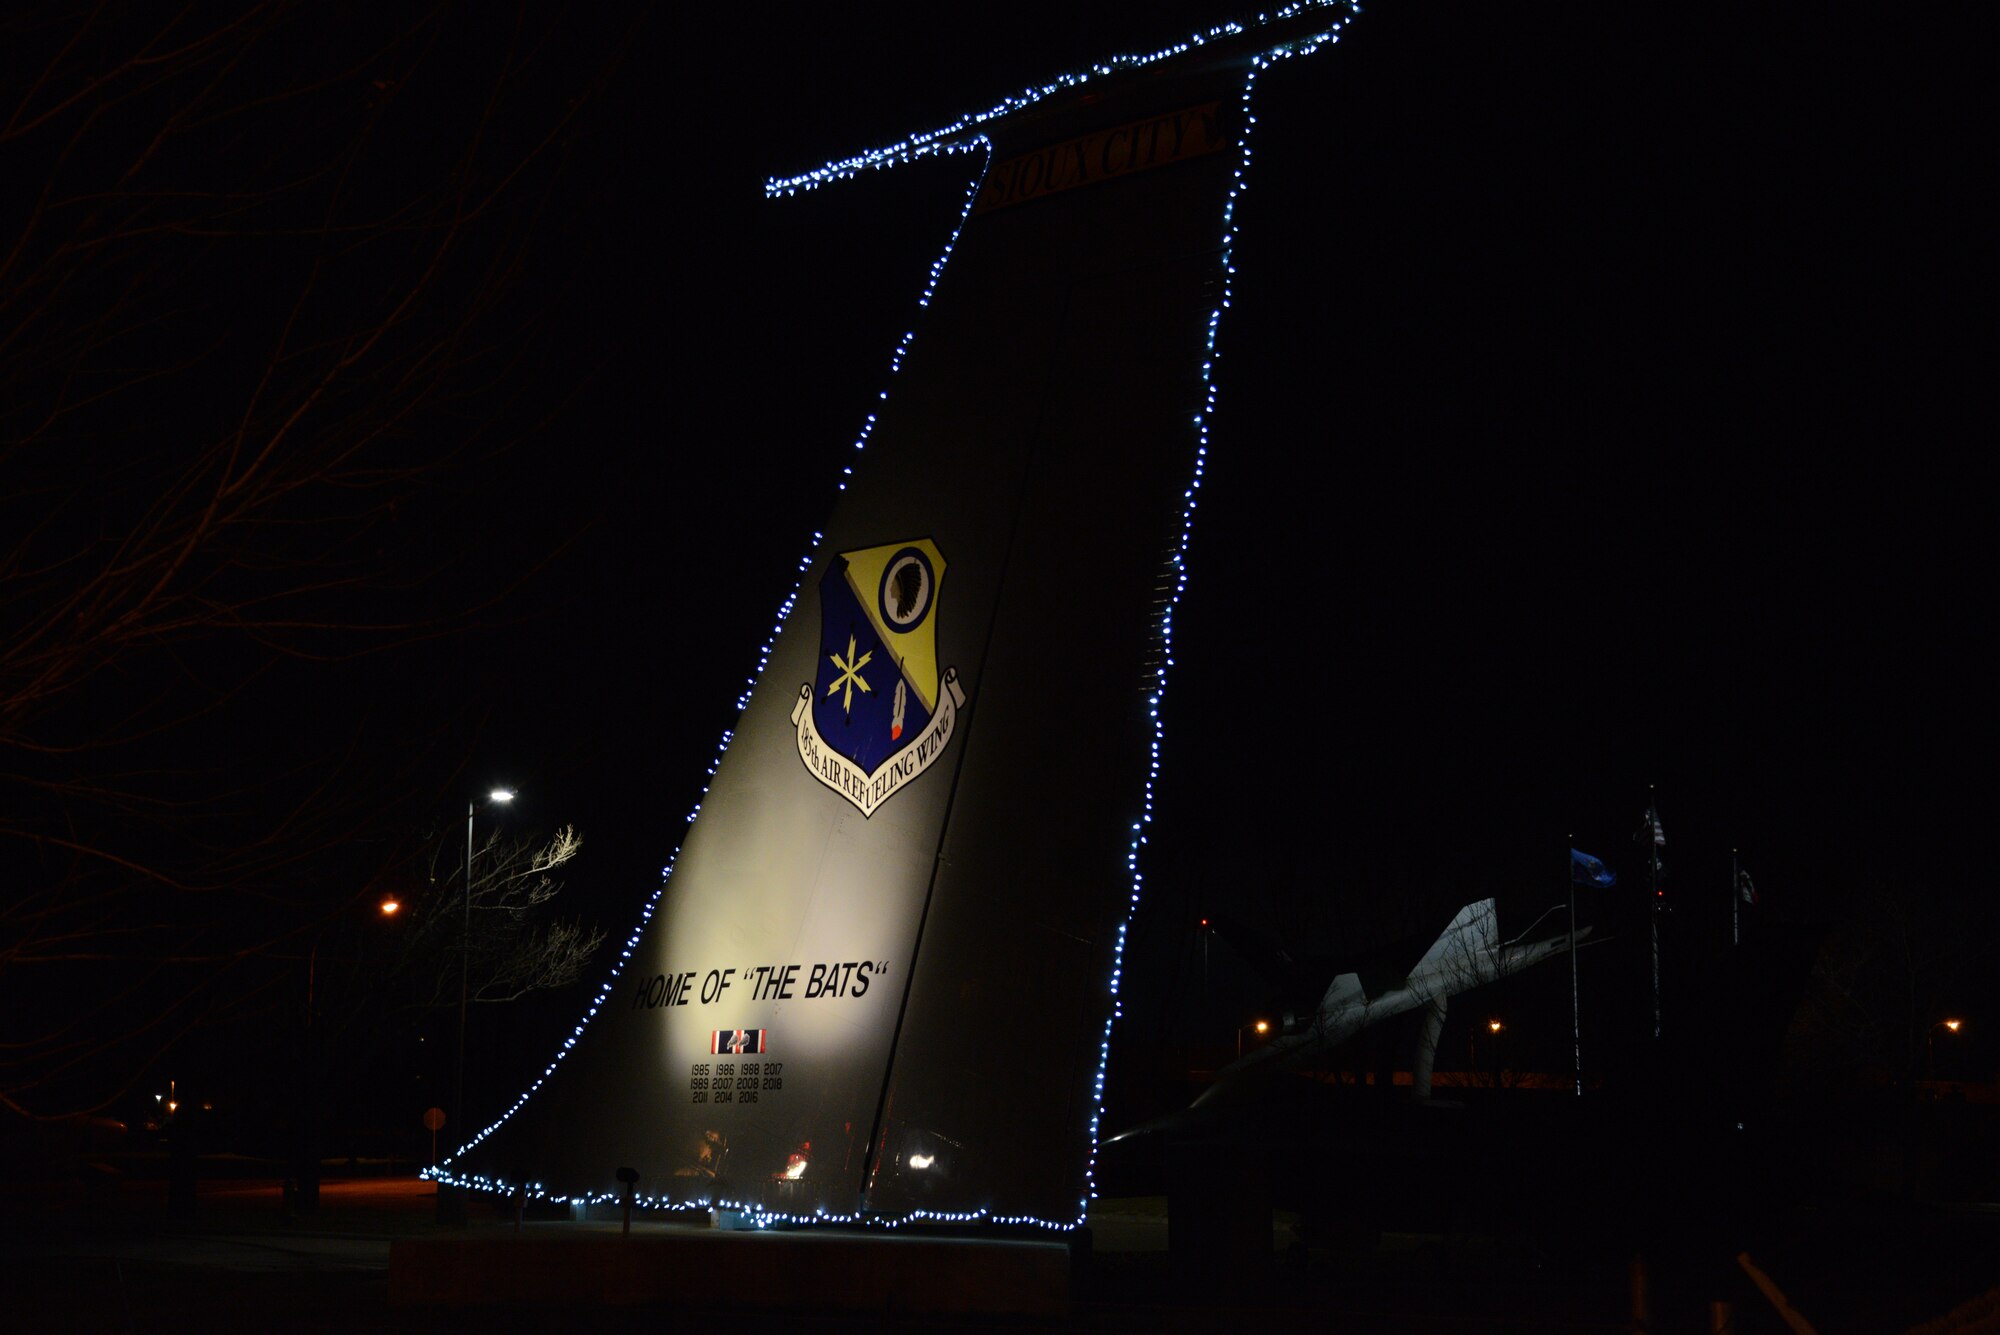 The tail of a KC-135 static display is decorated with Christmas lights near the main entrance of the 185th Air Refueling Wing